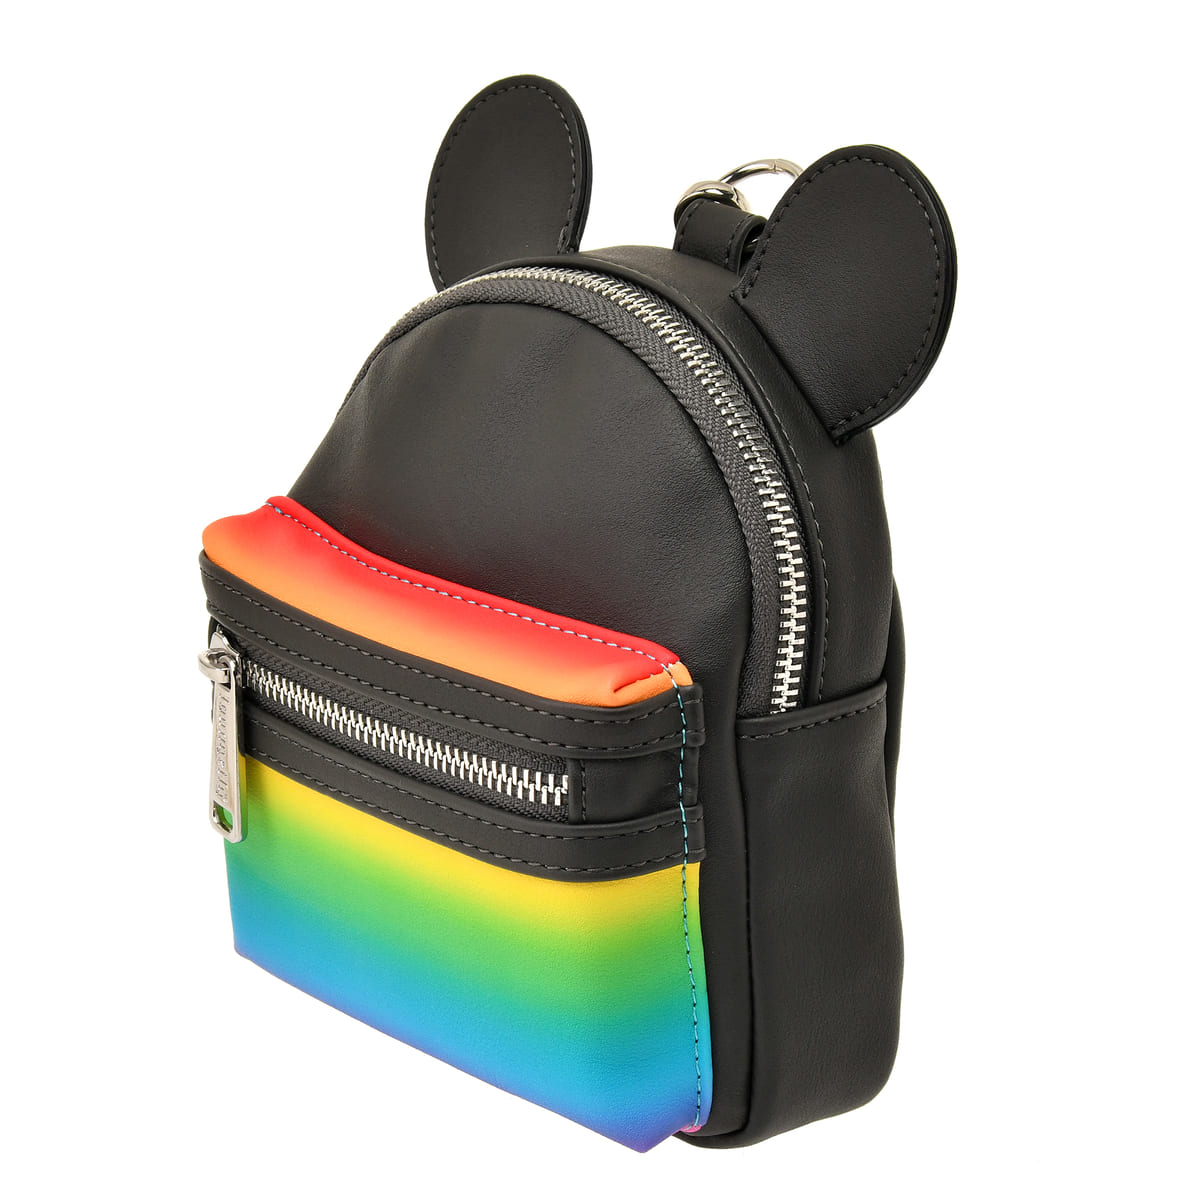 【Loungefly】ミッキー リストレット THE WALT DISNEY COMPANY PRIDE COLLECTION02